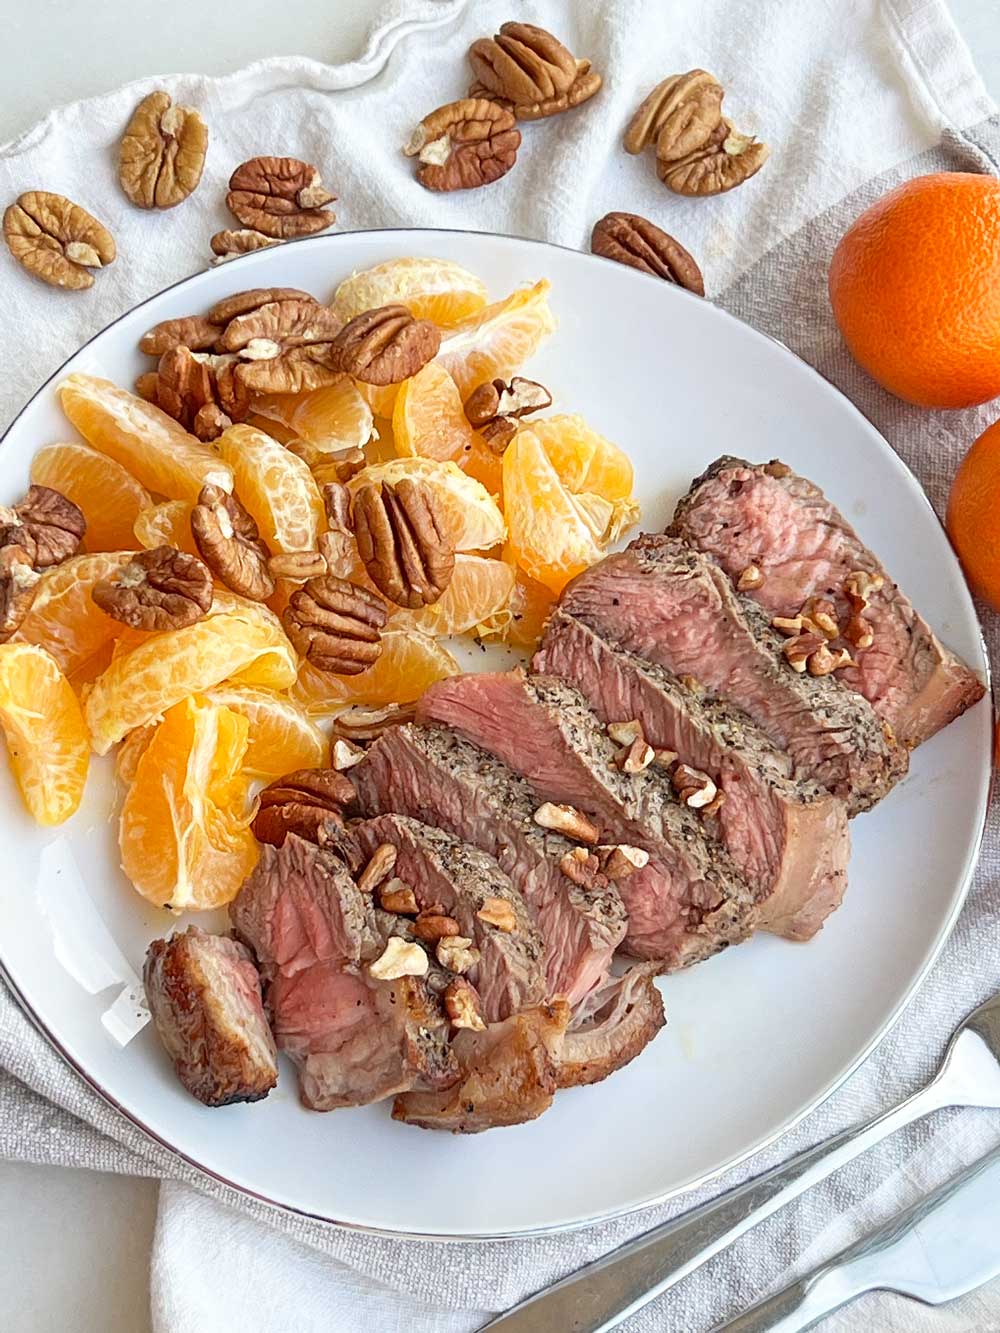 Easy NY Strip Steak w/ Prosecco Vinaigrette (5 Ingredient Recipe) Easy date night dinner and perfect weeknight meal. www.ChopHappy.com #steakrecipe #Prosecco